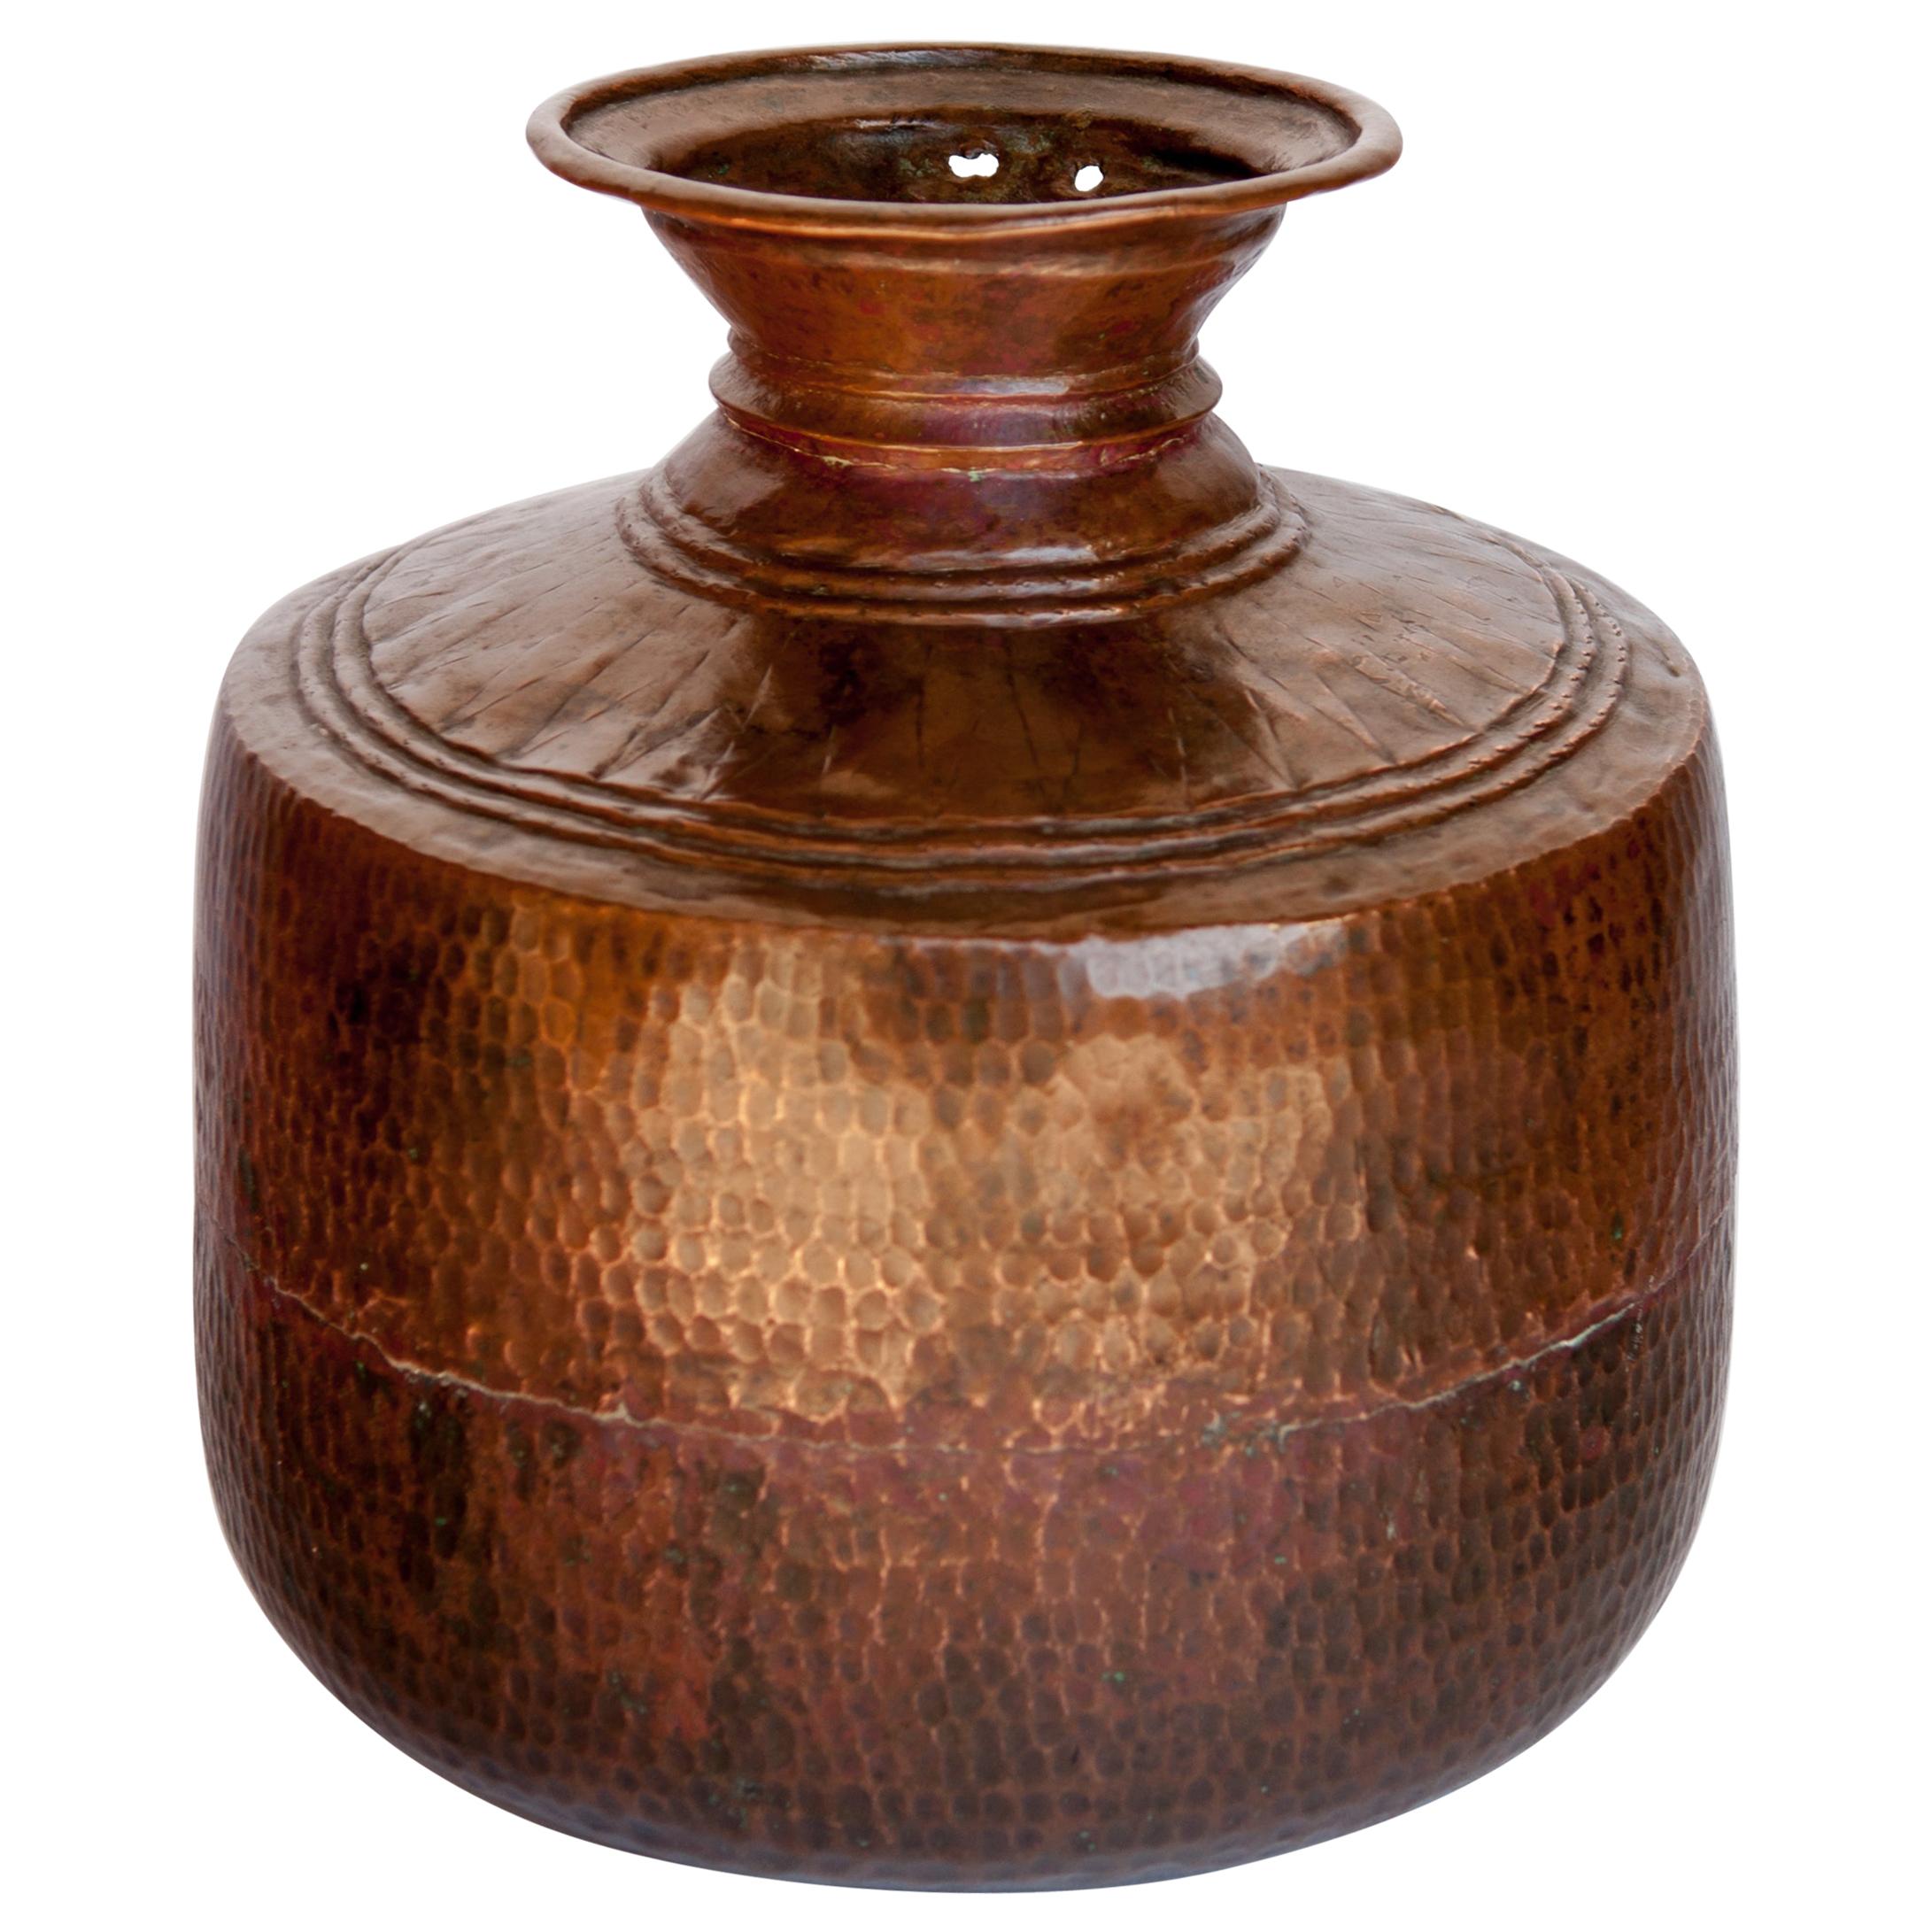 Vintage Copper Water Pot, Hand Hammered, from Nepal, Mid-20th Century